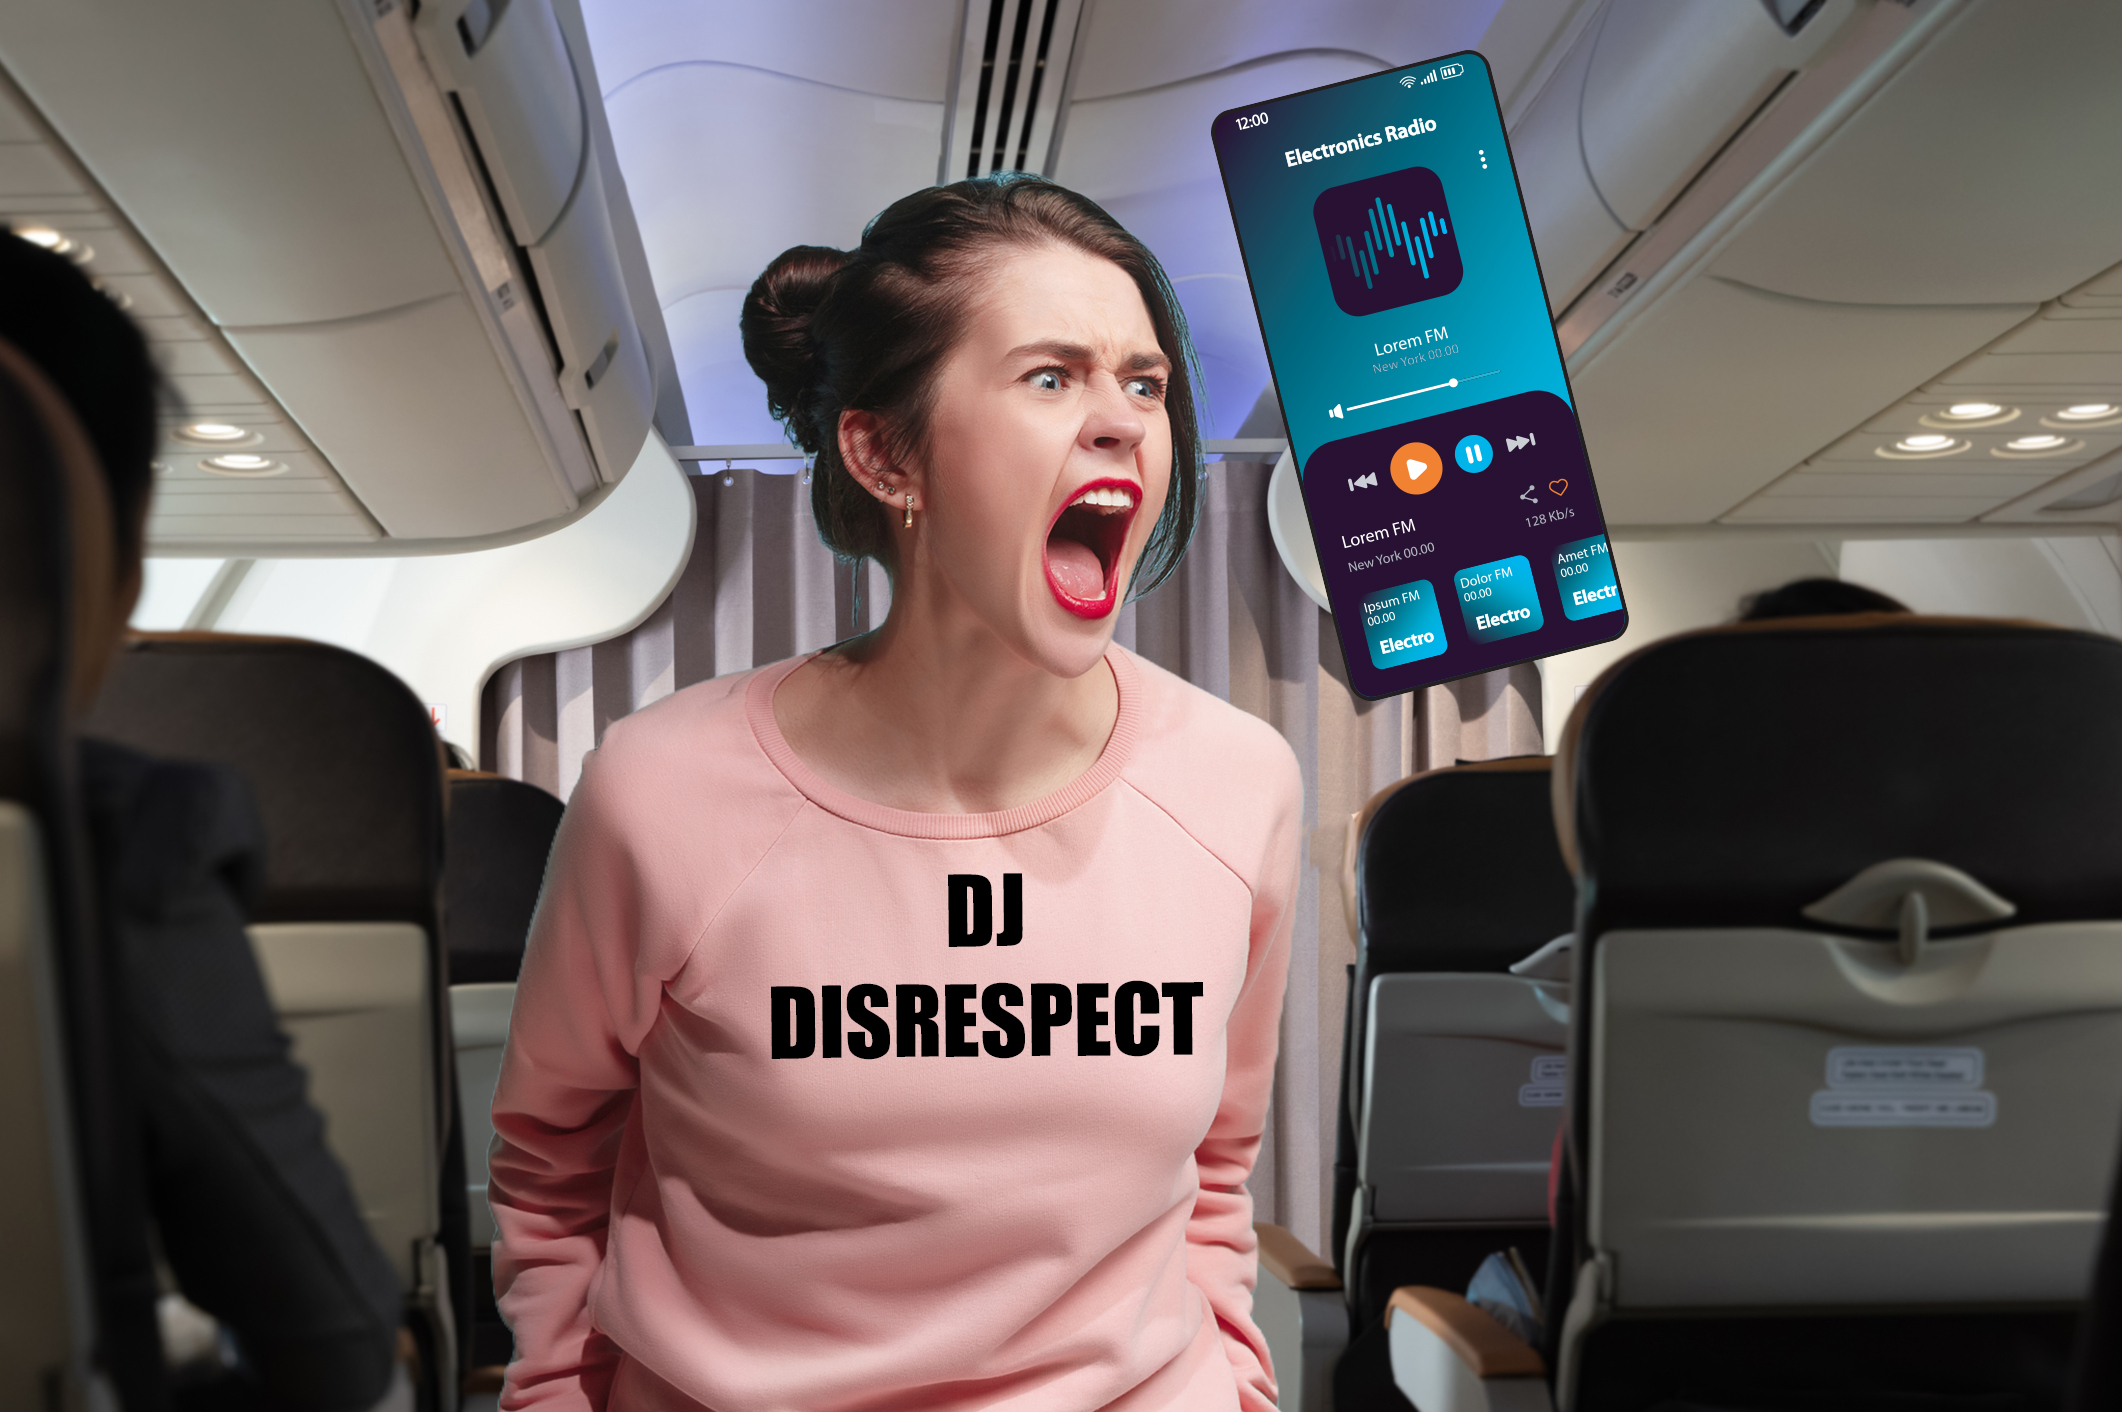 "Kiss My A—!" I Asked a Would-Be DJ Blasting Music During My Flight to Turn Down Her Music - Eye of the Flyer